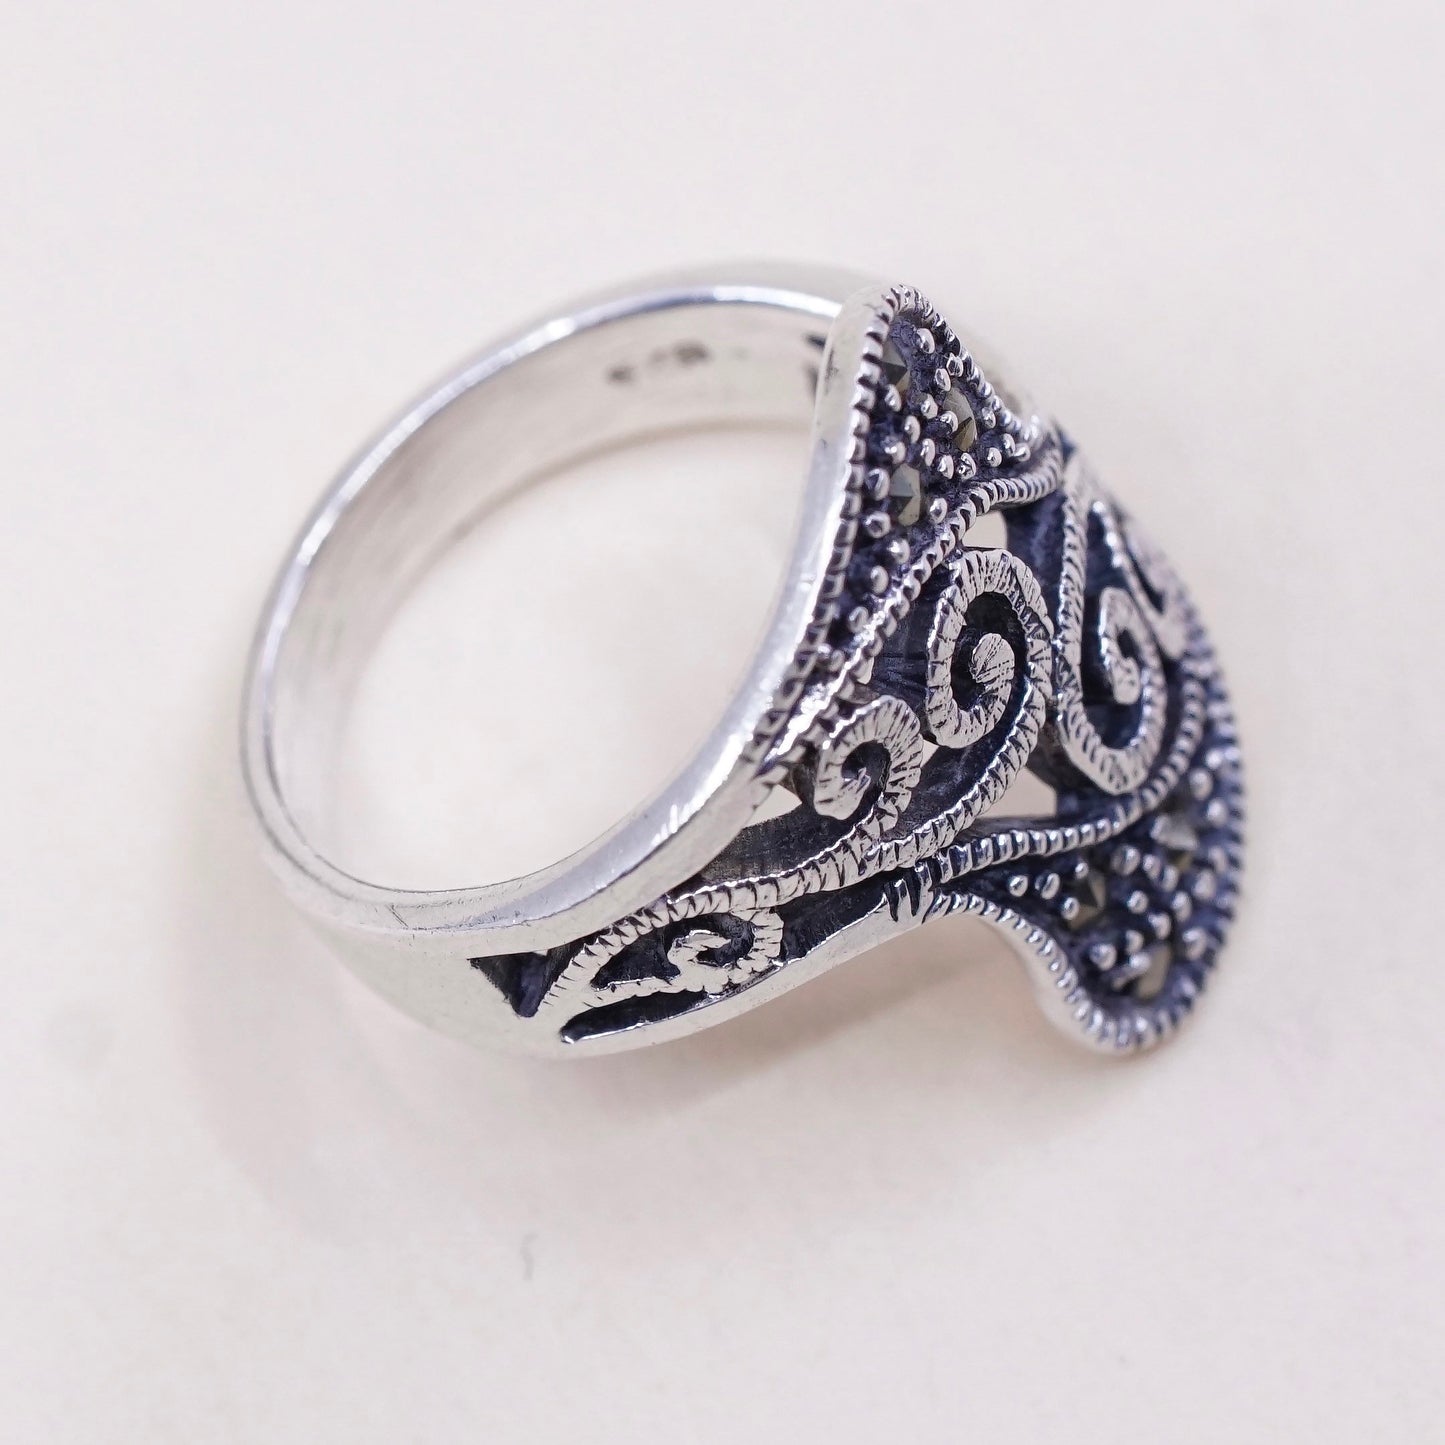 Size 7, Vintage Sterling silver handmade ring, 925 band with Marcasite